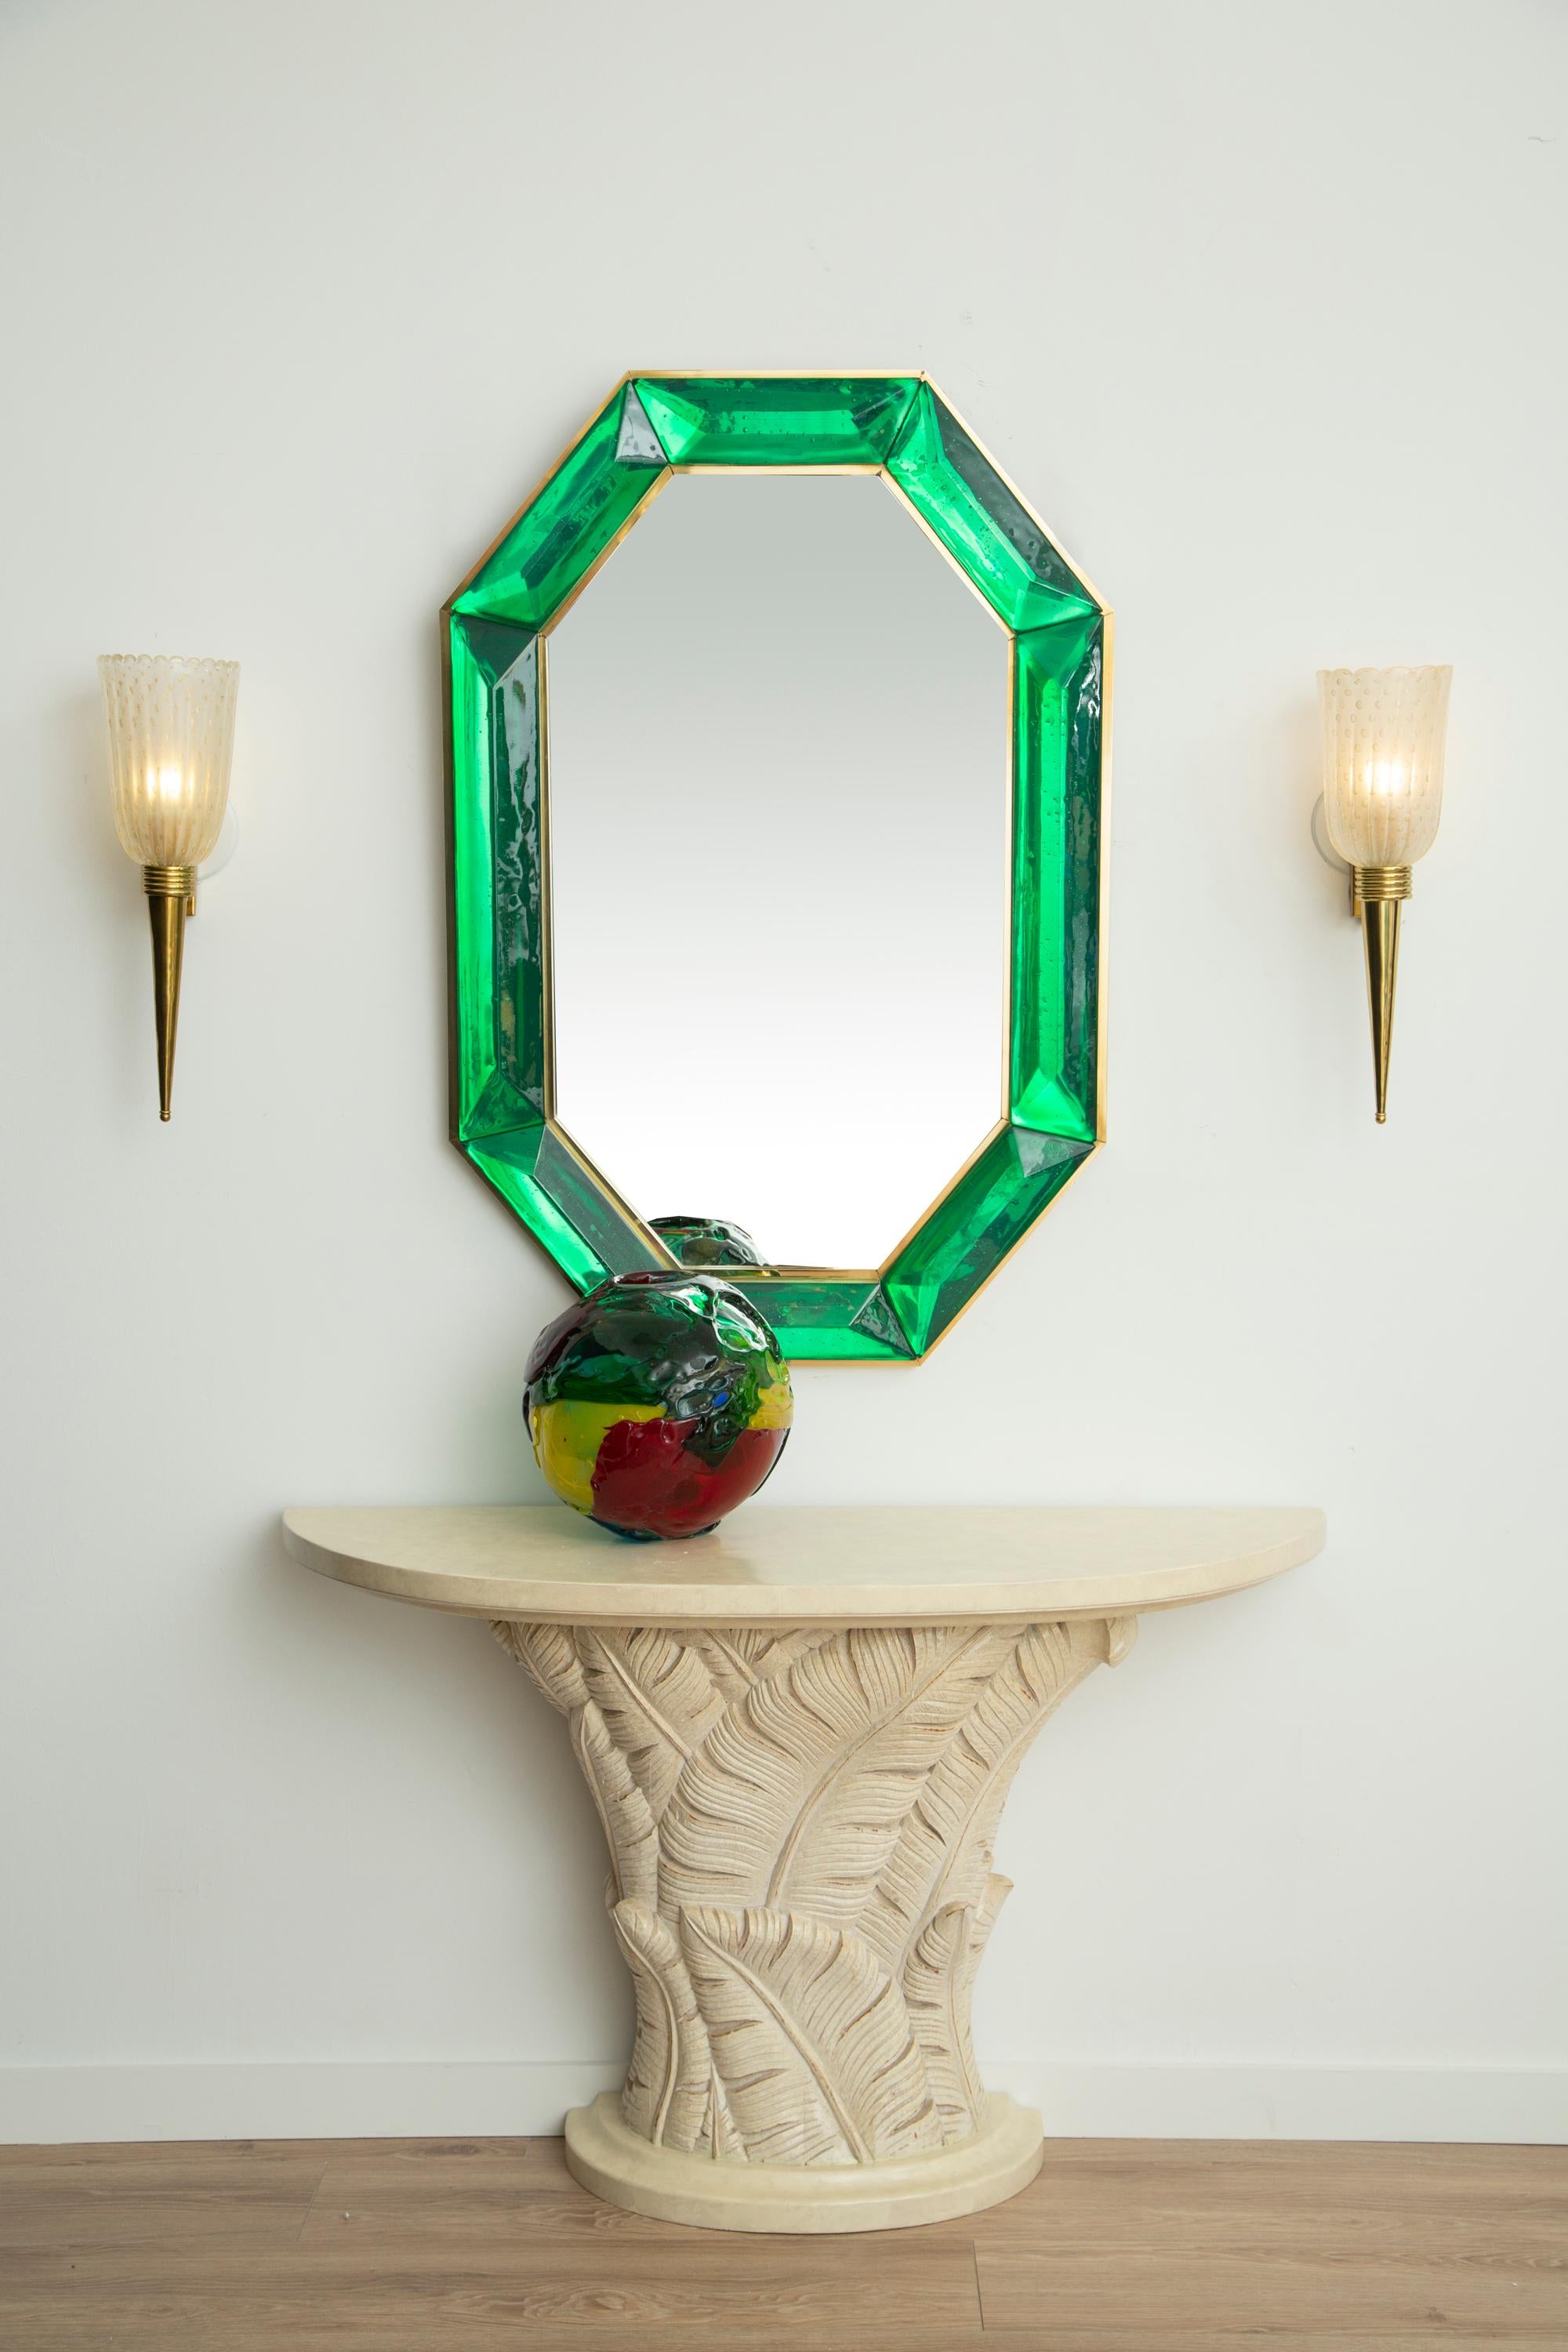 Bespoke octagon emerald green Murano glass mirror, in stock
 Vivid and intense emerald green glass block with naturally occurring air inclusions throughout 
 Highly polished faceted pattern
 Brass gallery all around
 Each mirror is a unique luxury